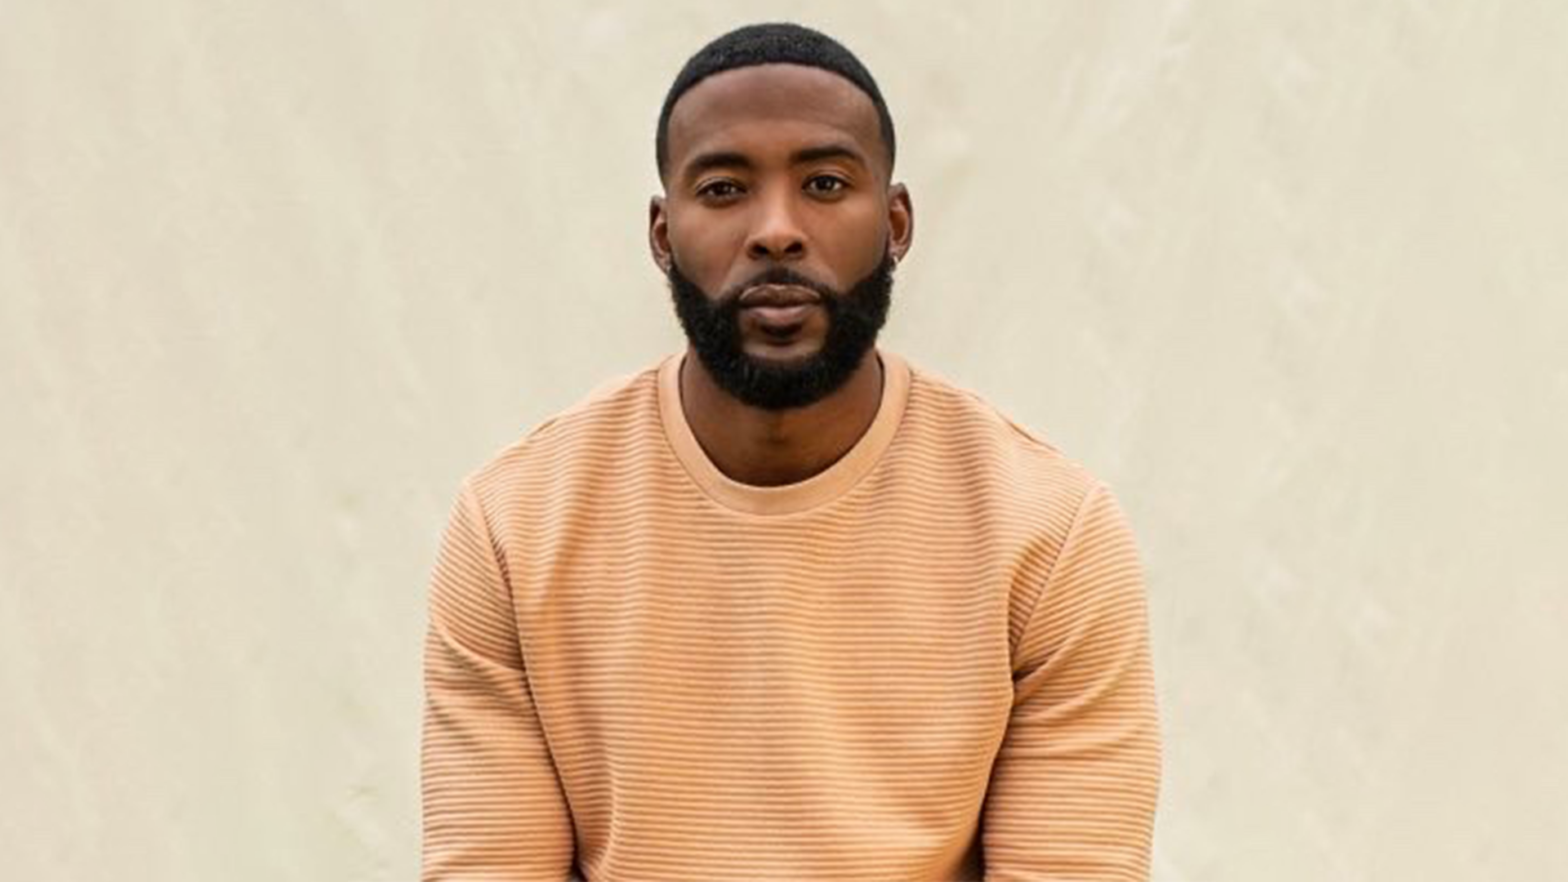 Former NFL Player Andrew Hawkins Says He's 'Seen Where A Sport Could Use Somebody Up' — Now, He's Changing The Narrative